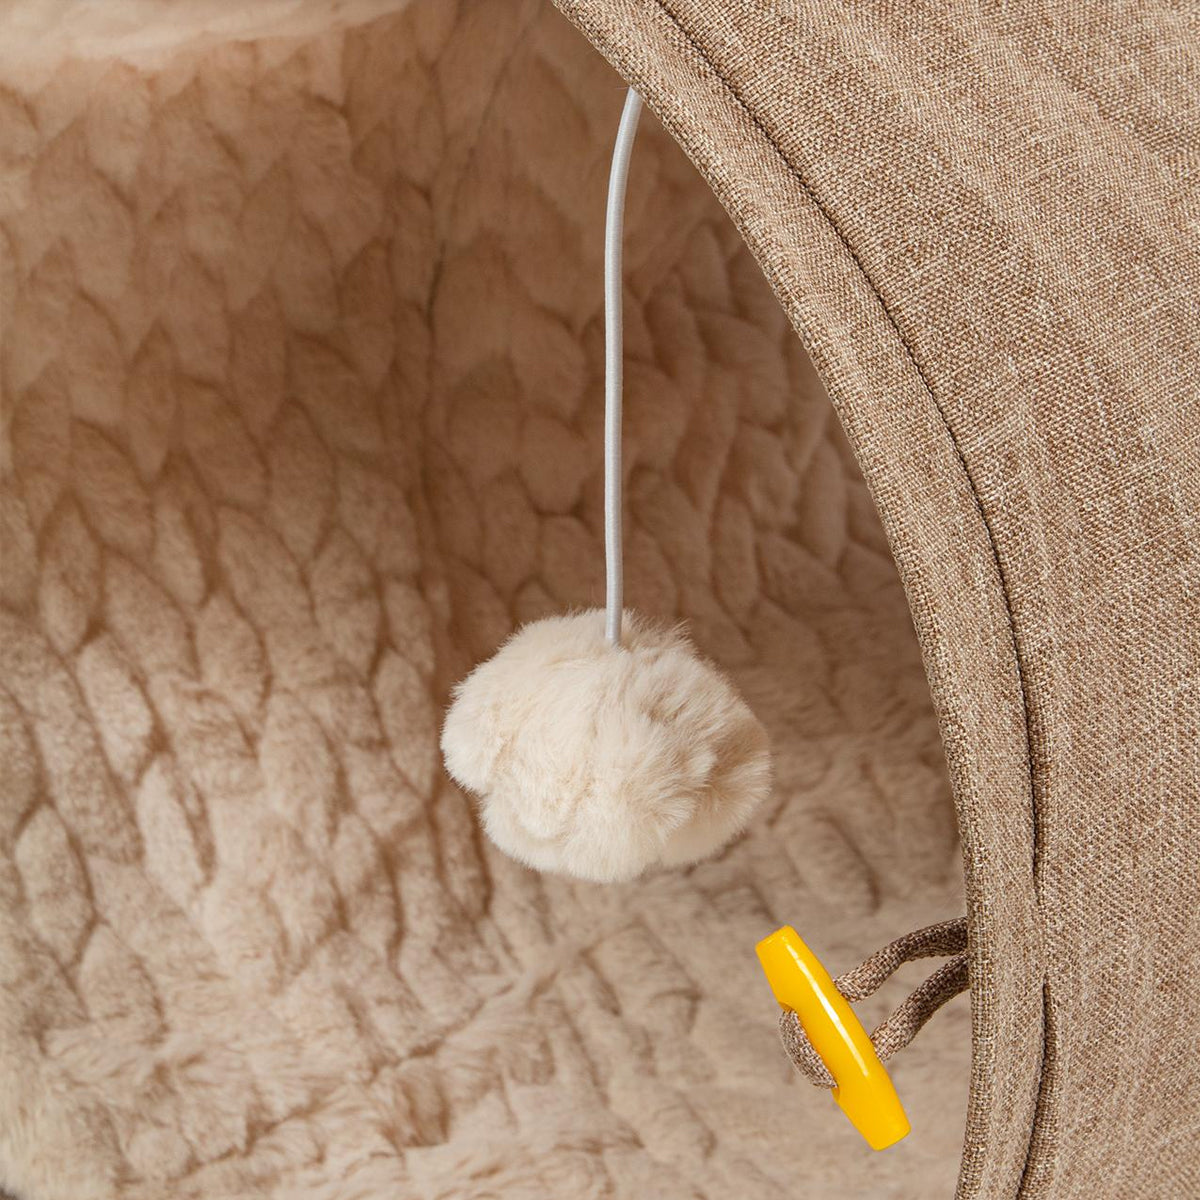 CanadianCat Large Cat Tunnel, In Beige Fabric With Plush Fabric Inner | at Made Moggie